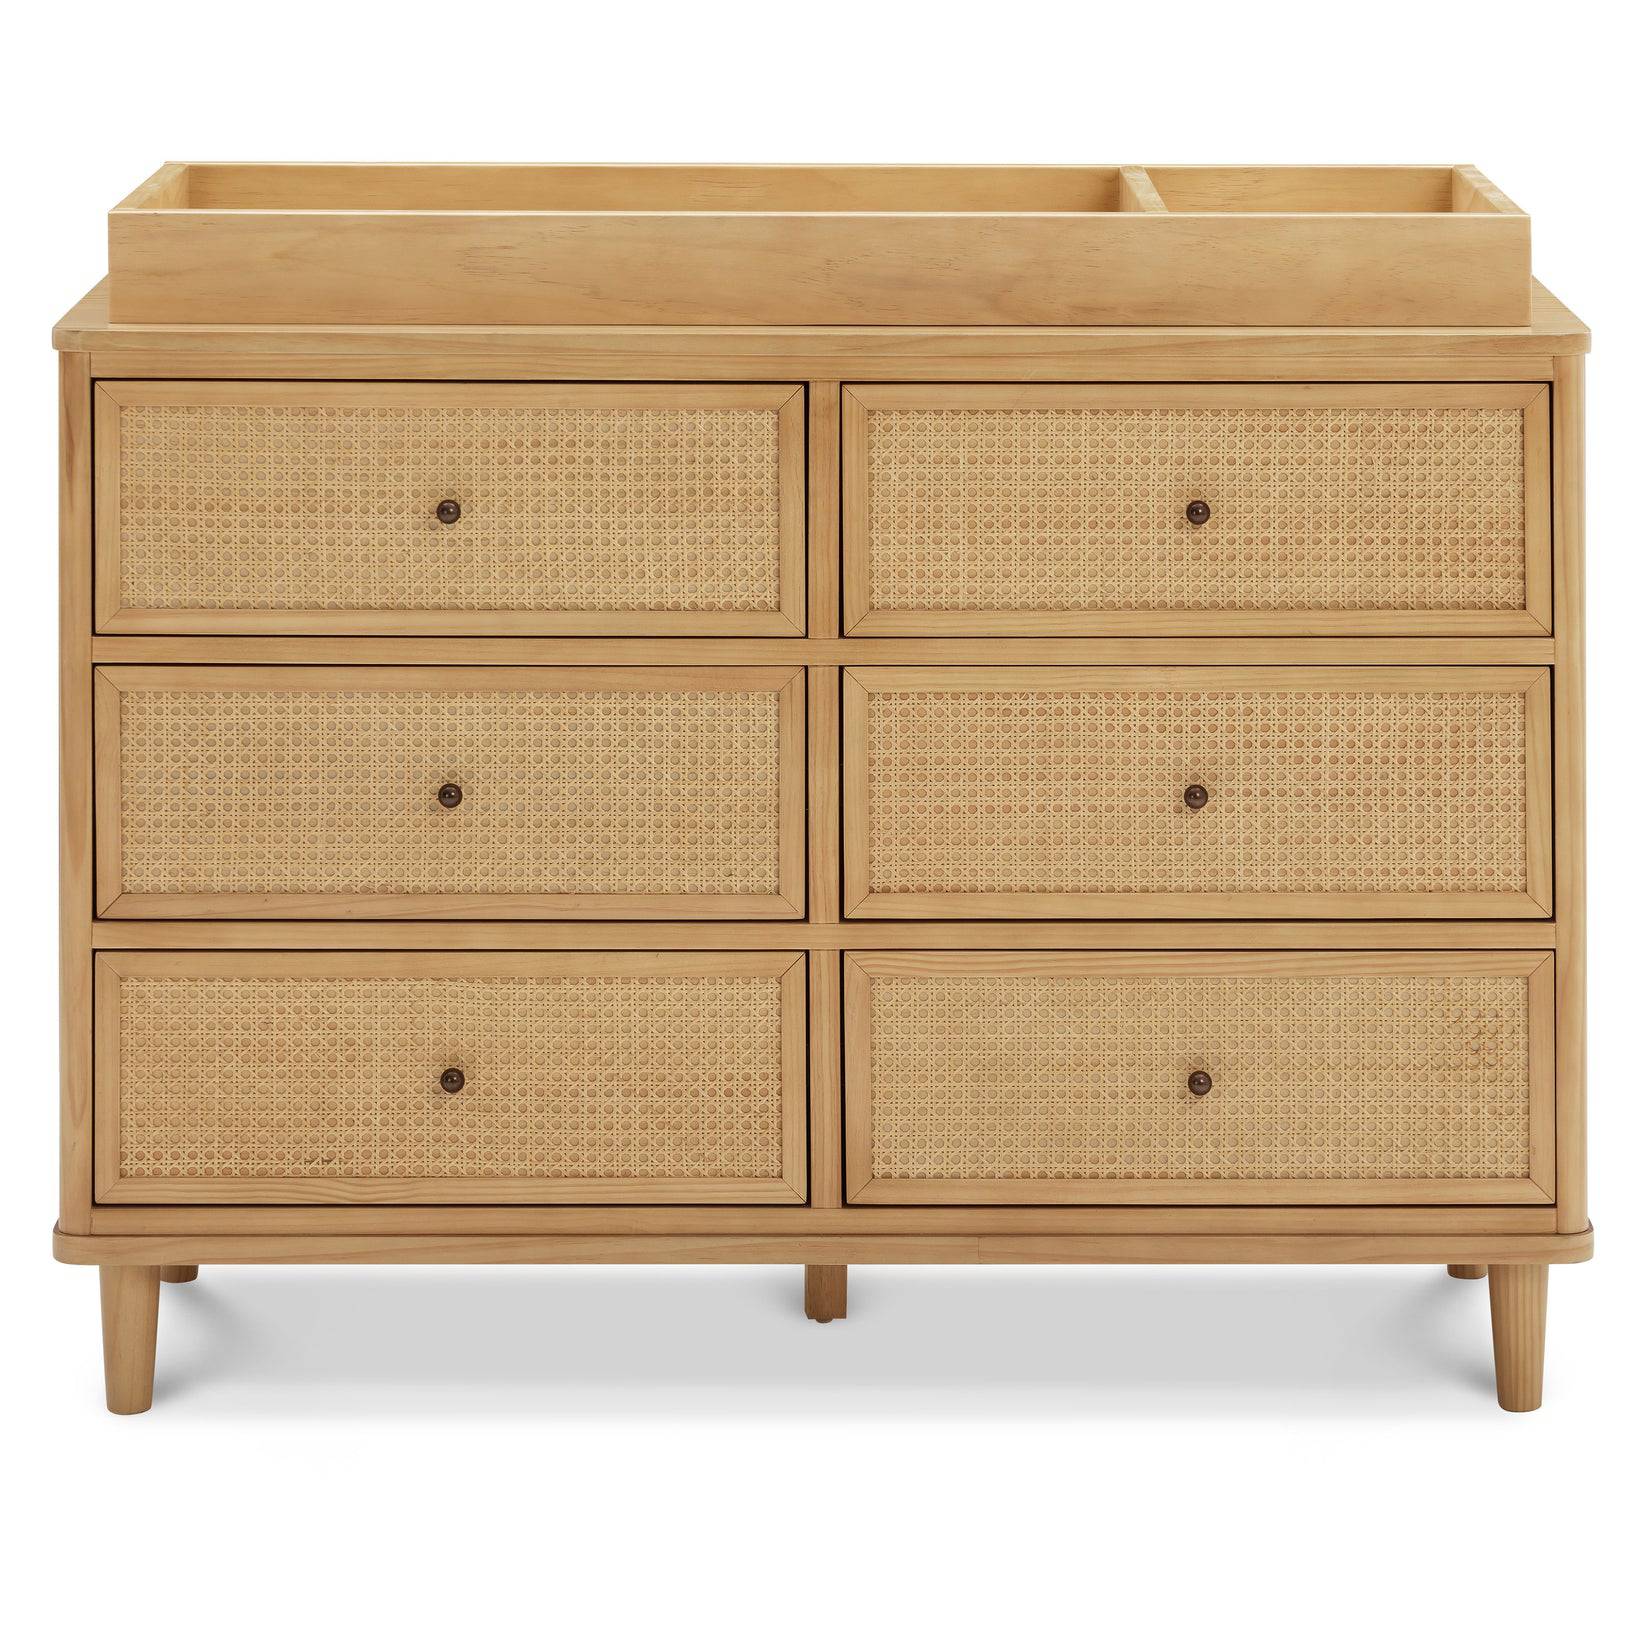 Marin with Cane 6 Drawer Dresser - Twinkle Twinkle Little One